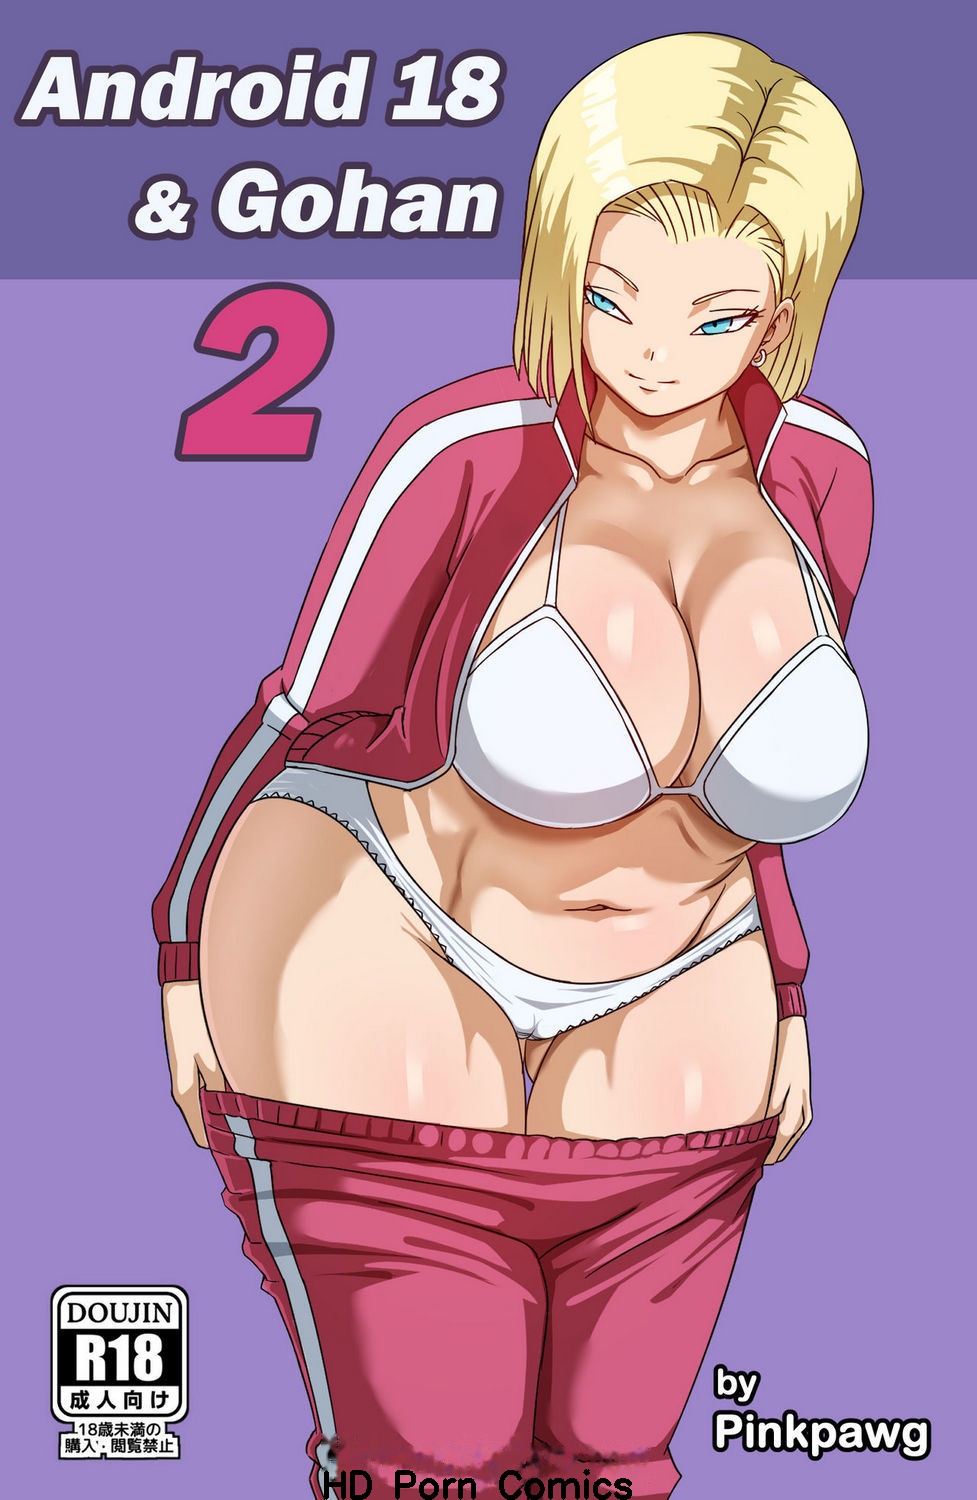 Porn android 18 Android 18